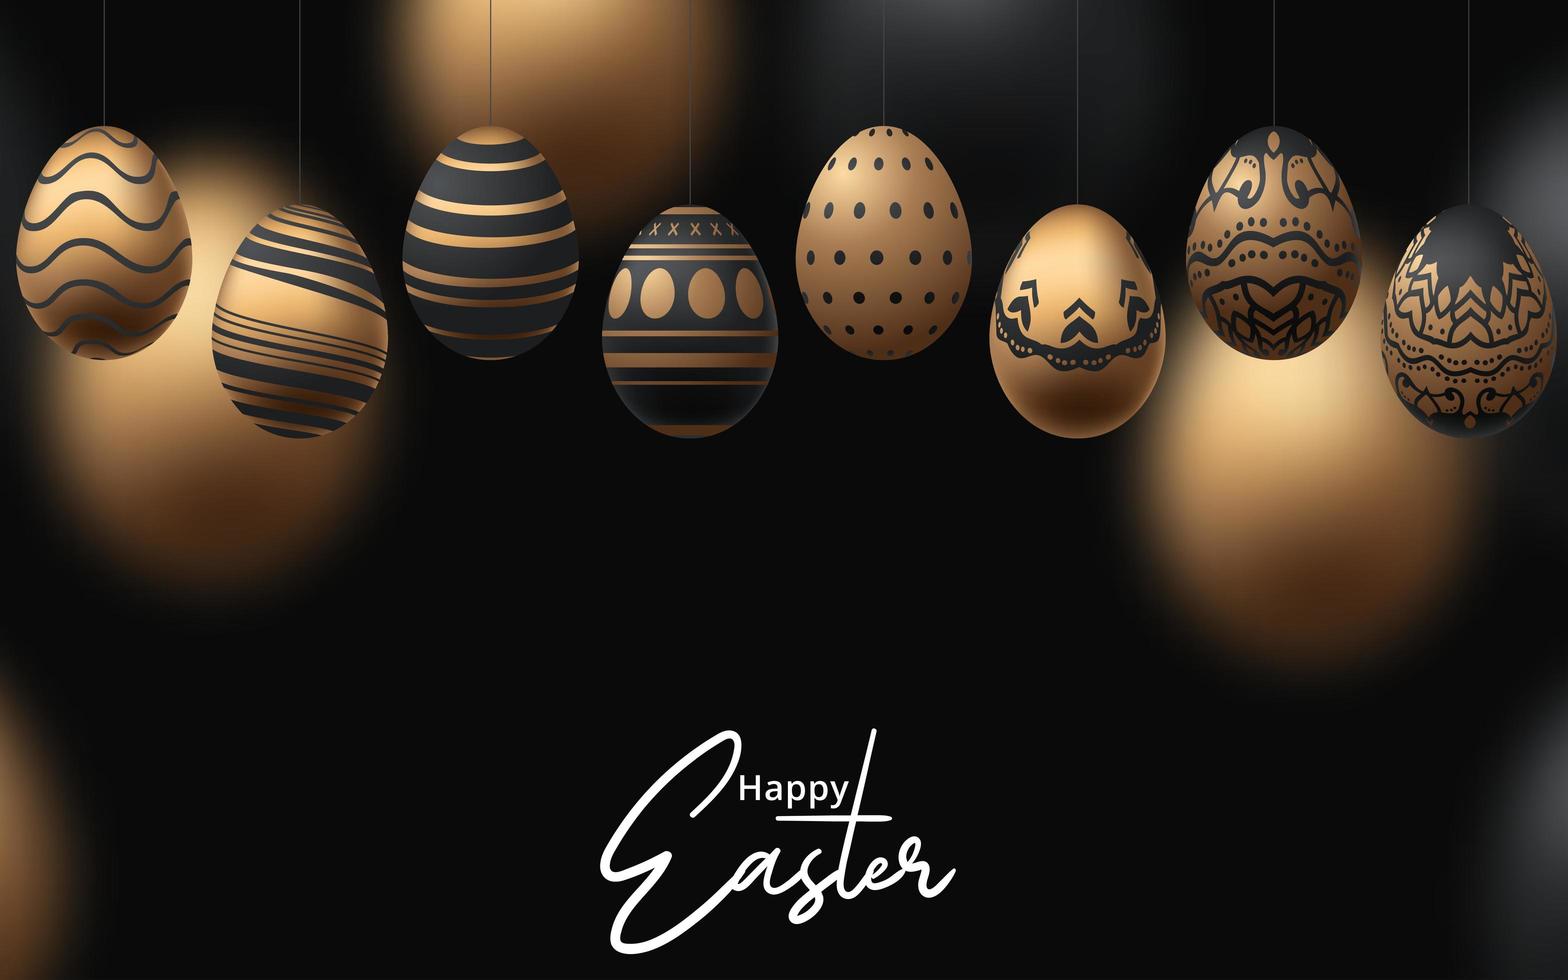 Happy Easter background with realistic gold and black design